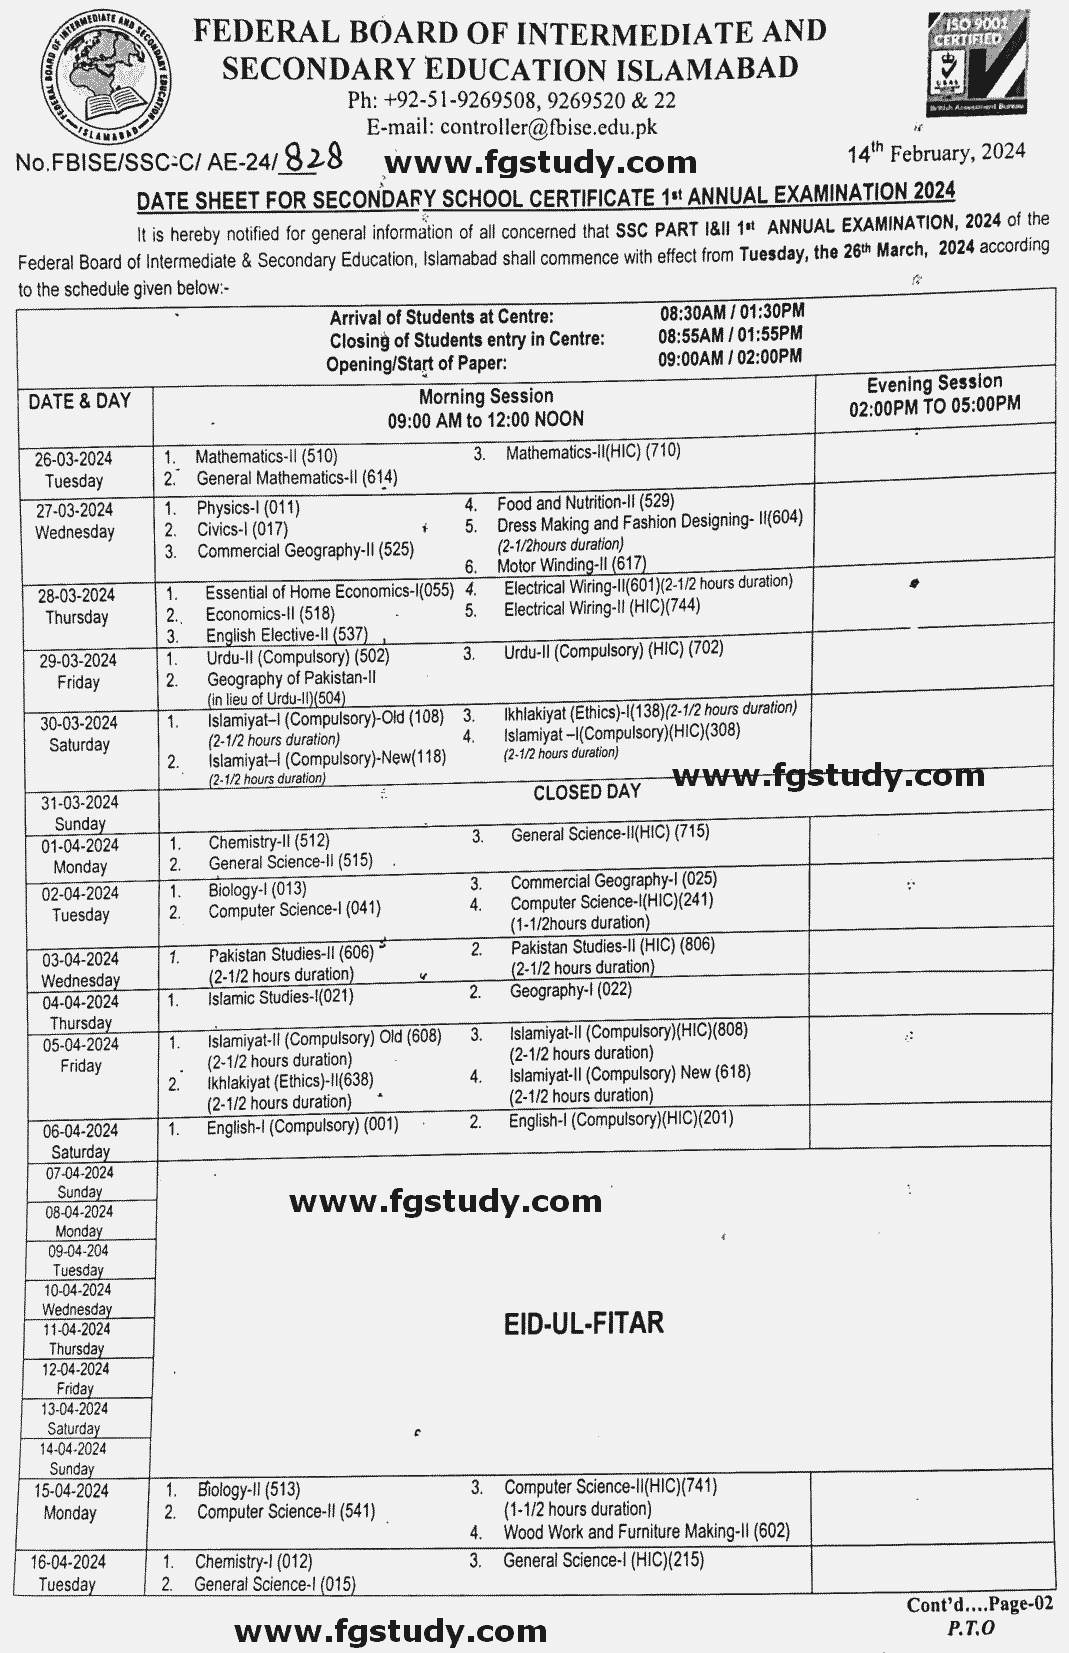 FBISE Date Sheet 2024 class 9th page 1 image